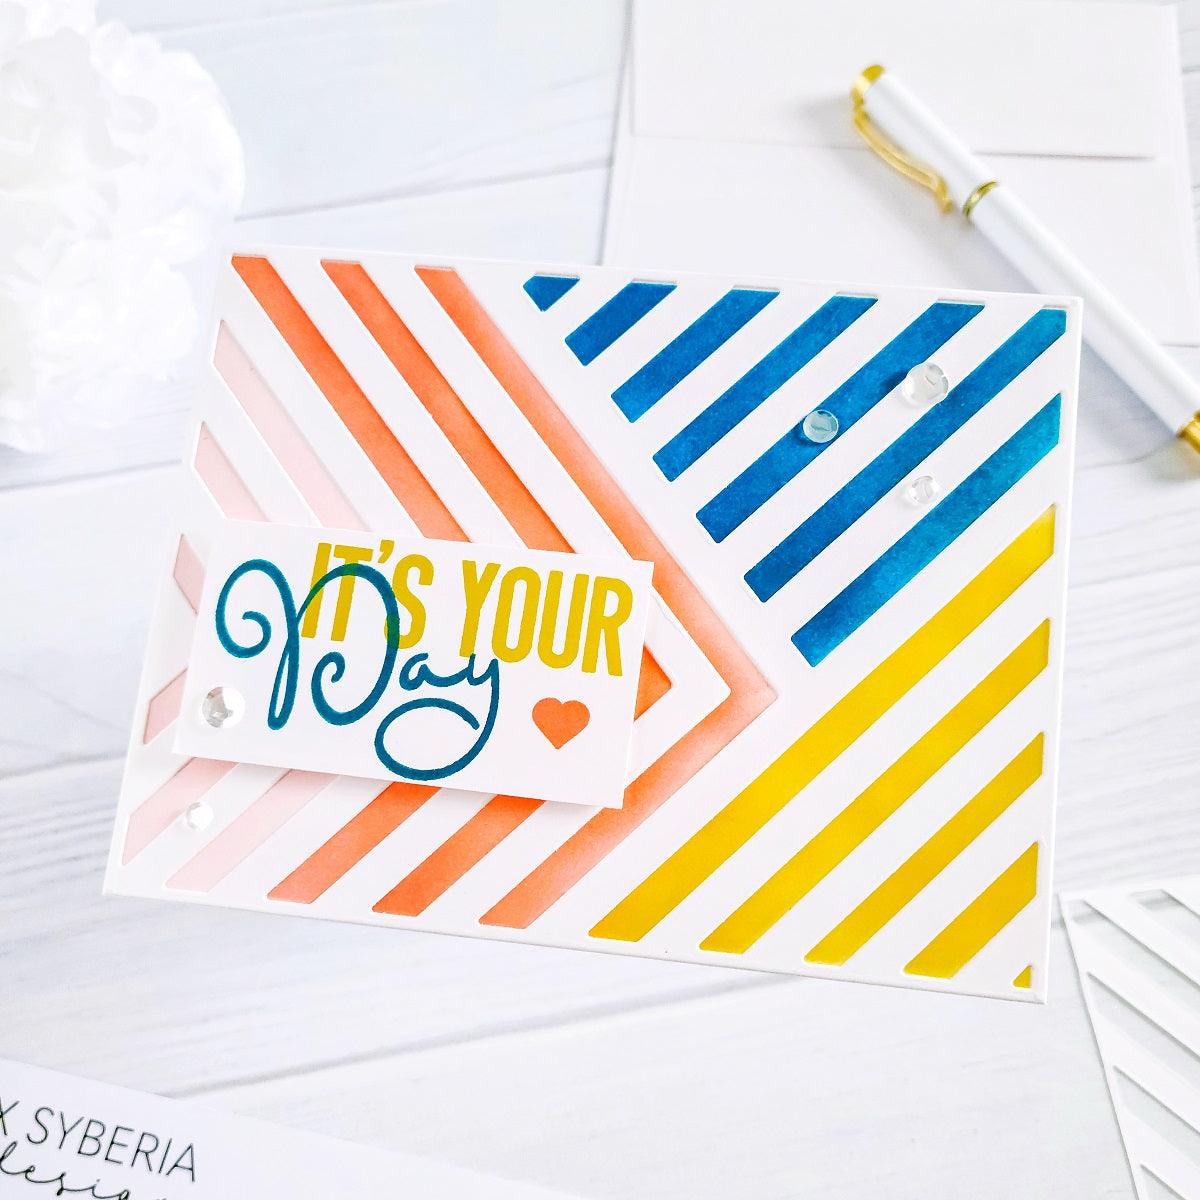 alex-syberia-designs-modern-stripes-stencils-cascards-cardmaking-ideas-birthday-cards-your-day-stamps-sentiment